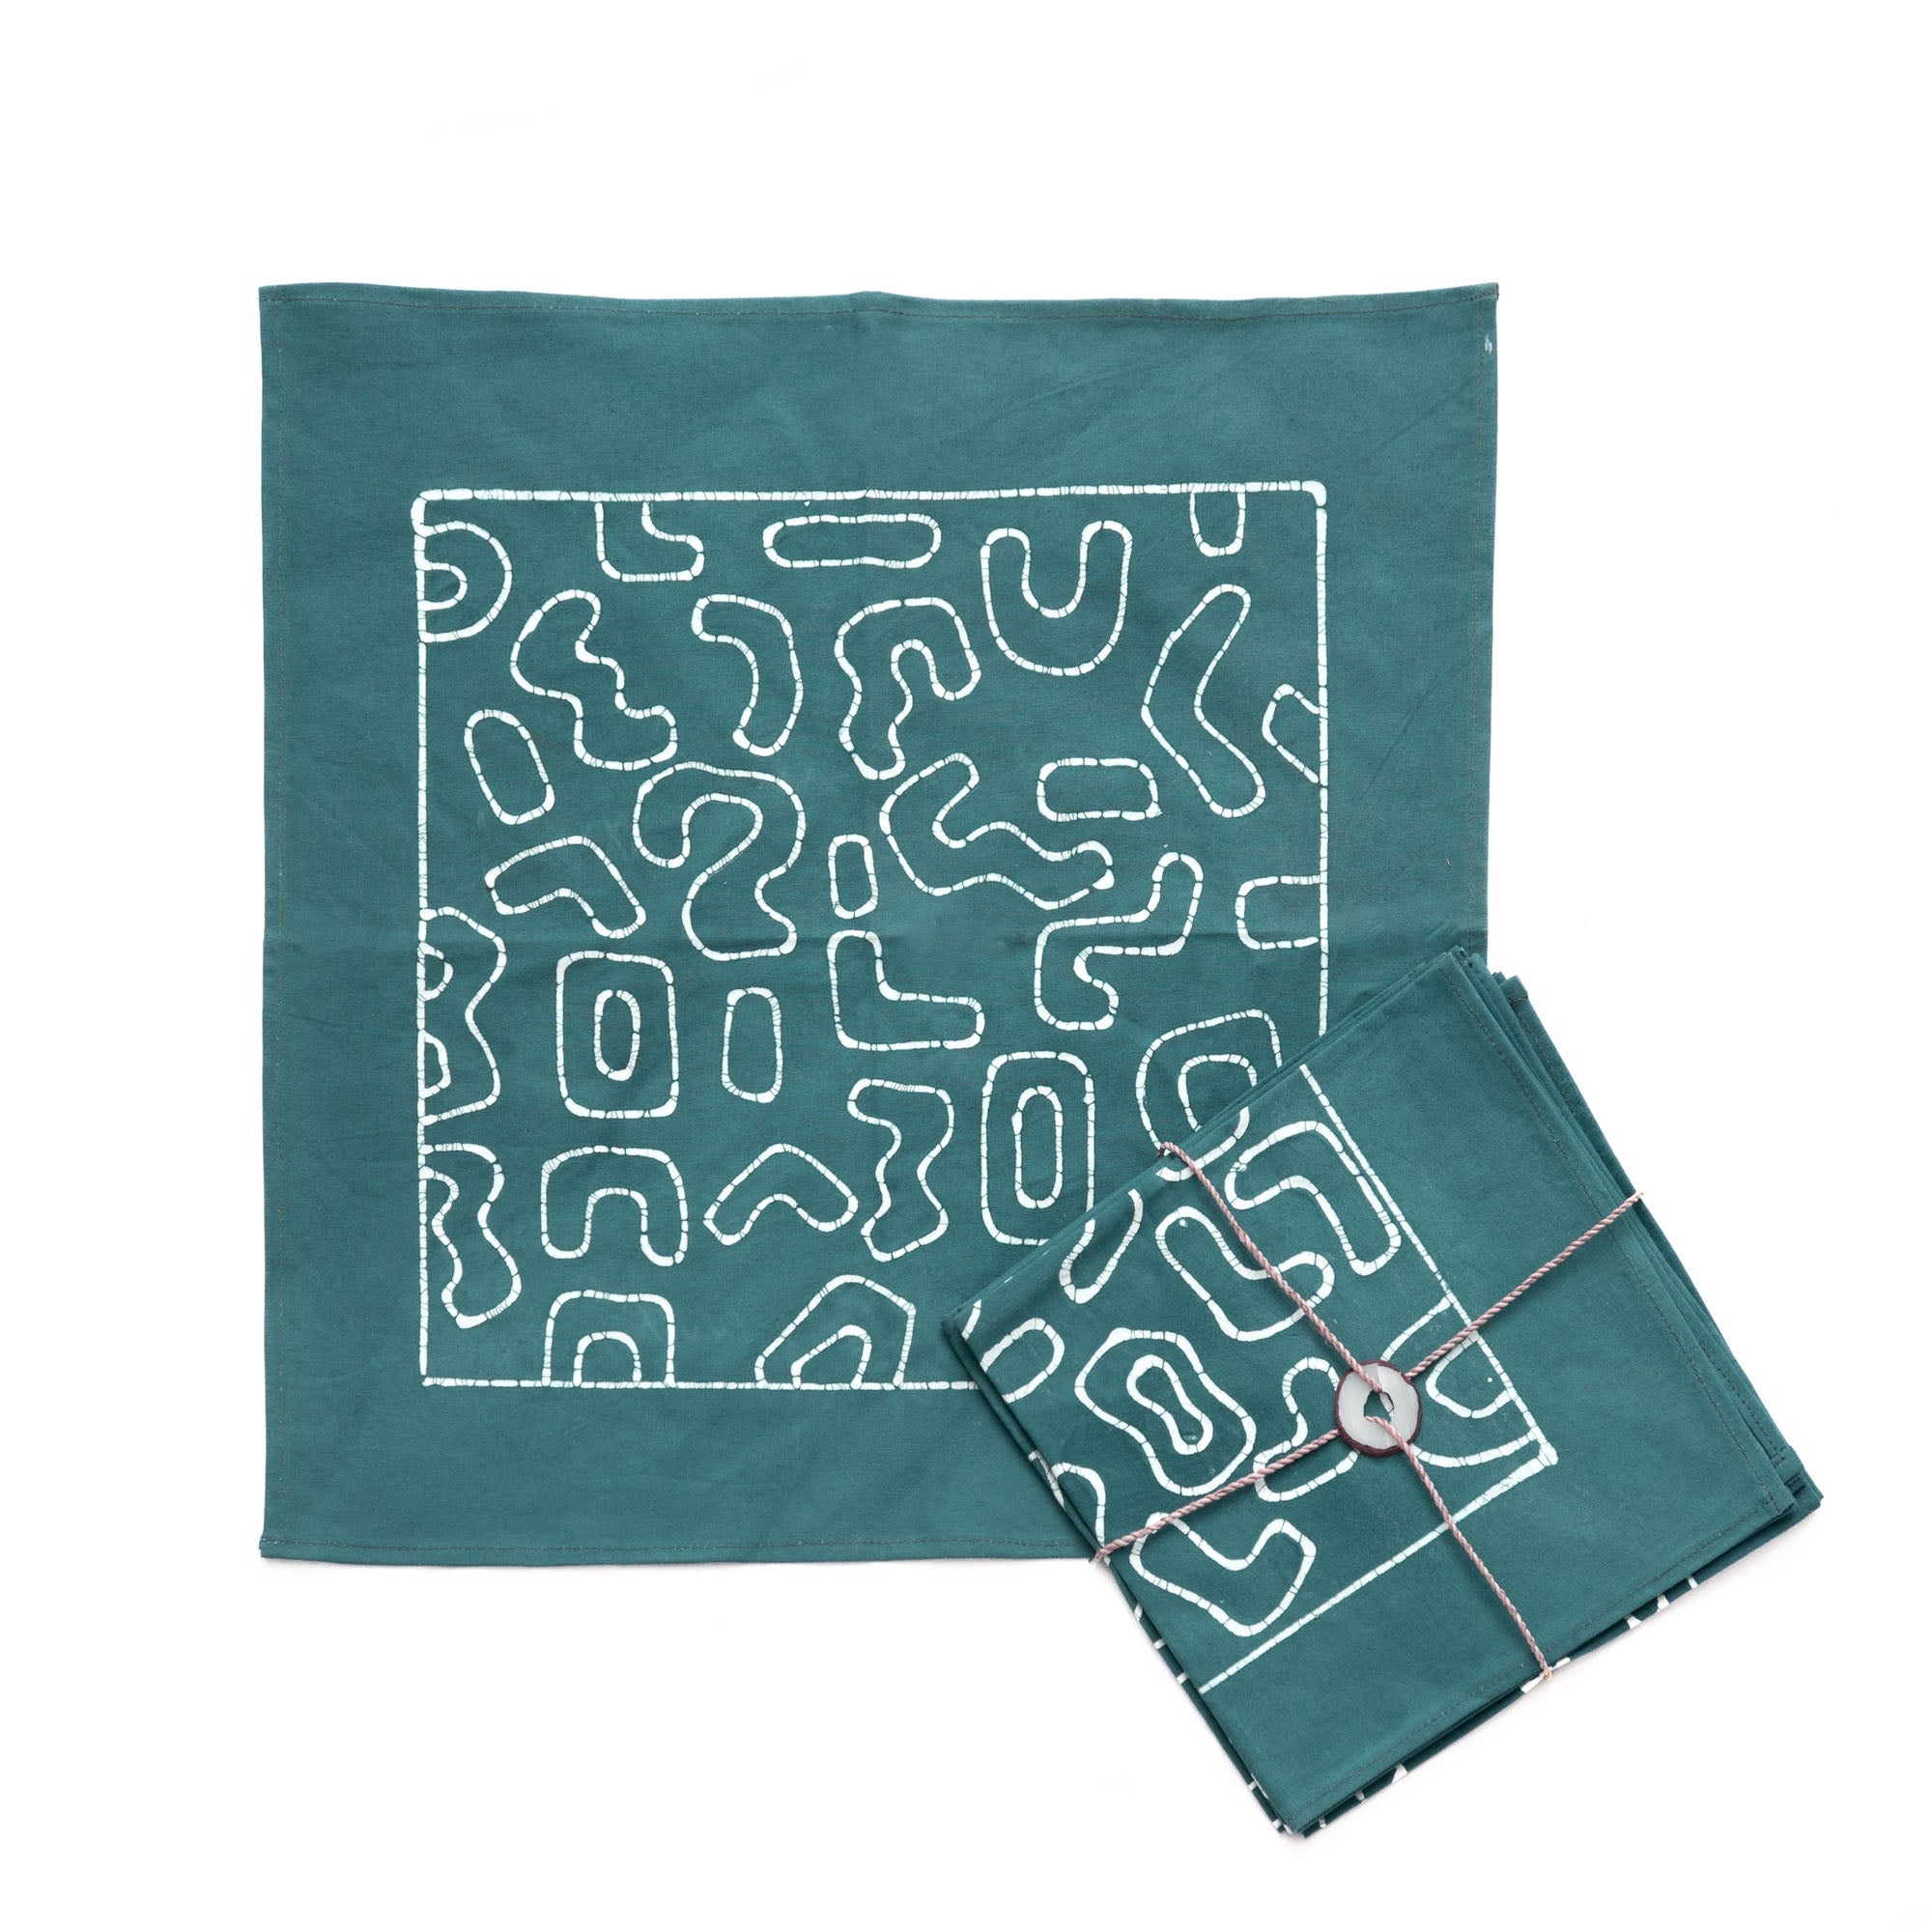 Kuba Blues Outline Teal Napkins - Handmade by TRIBAL TEXTILES - Handcrafted Home Decor Interiors - African Made